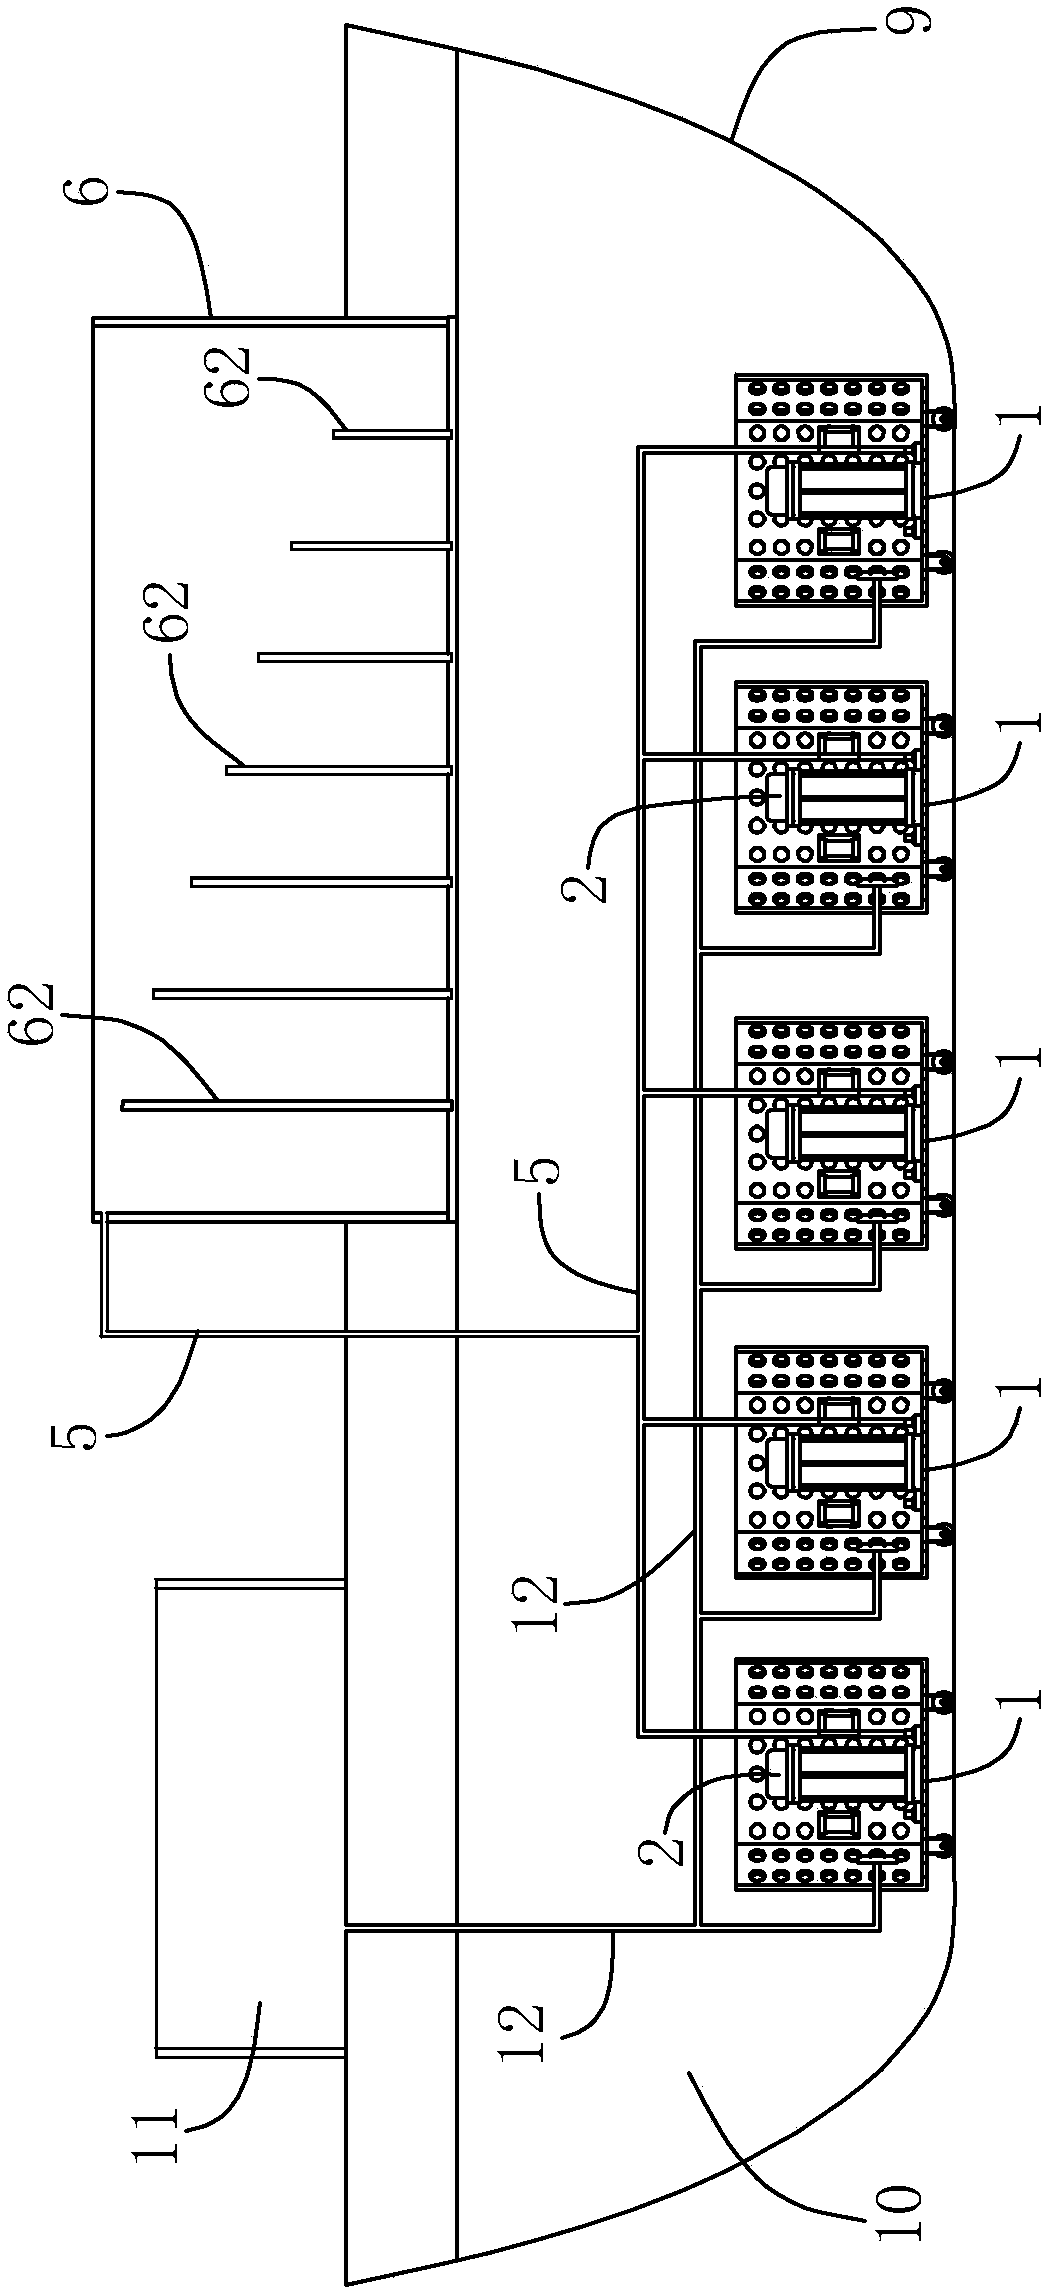 Crude oil bin cleaning system and method for FPSO (floating production storage and offloading) unit in offshore drilling platform